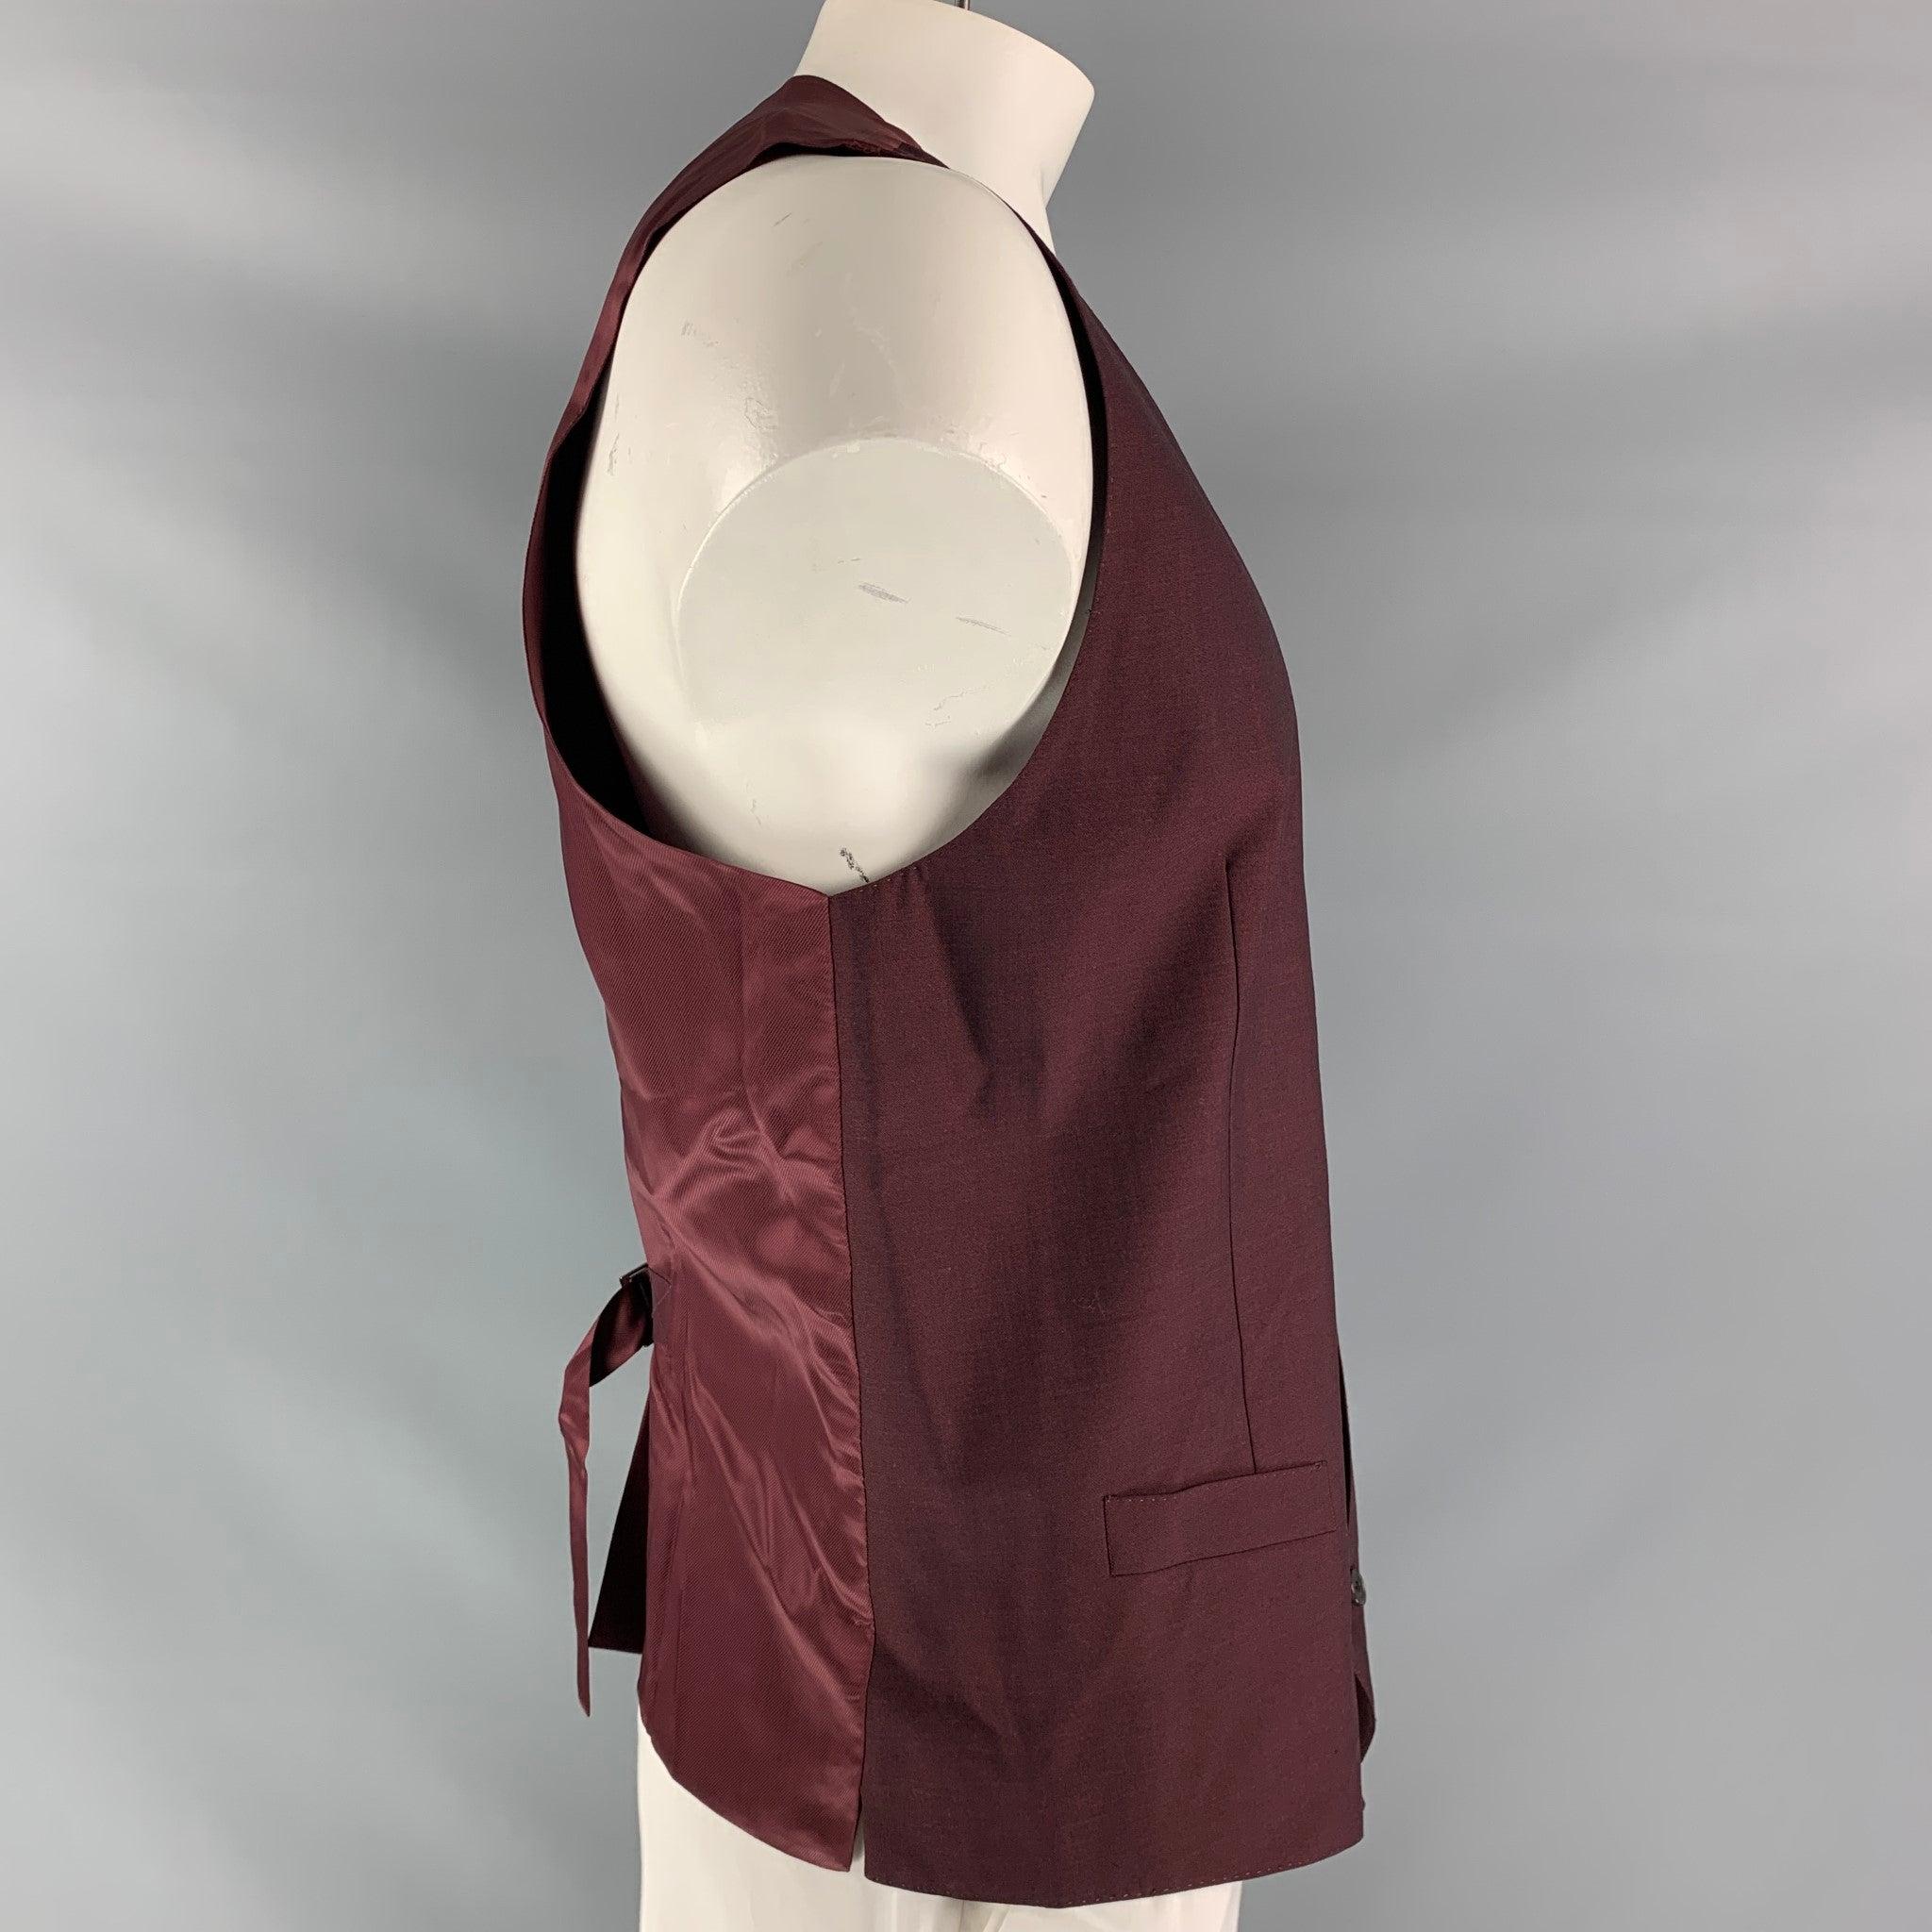 DOLCE & GABBANA dress vest comes in a burgundy mohair and wool fabric, full lined featuring V-neck, welt pockets, five buttons down closure, burgundy viscose fabric back and adjustable sliding belt. Made in Italy.Excellent Pre-Owned Condition. 